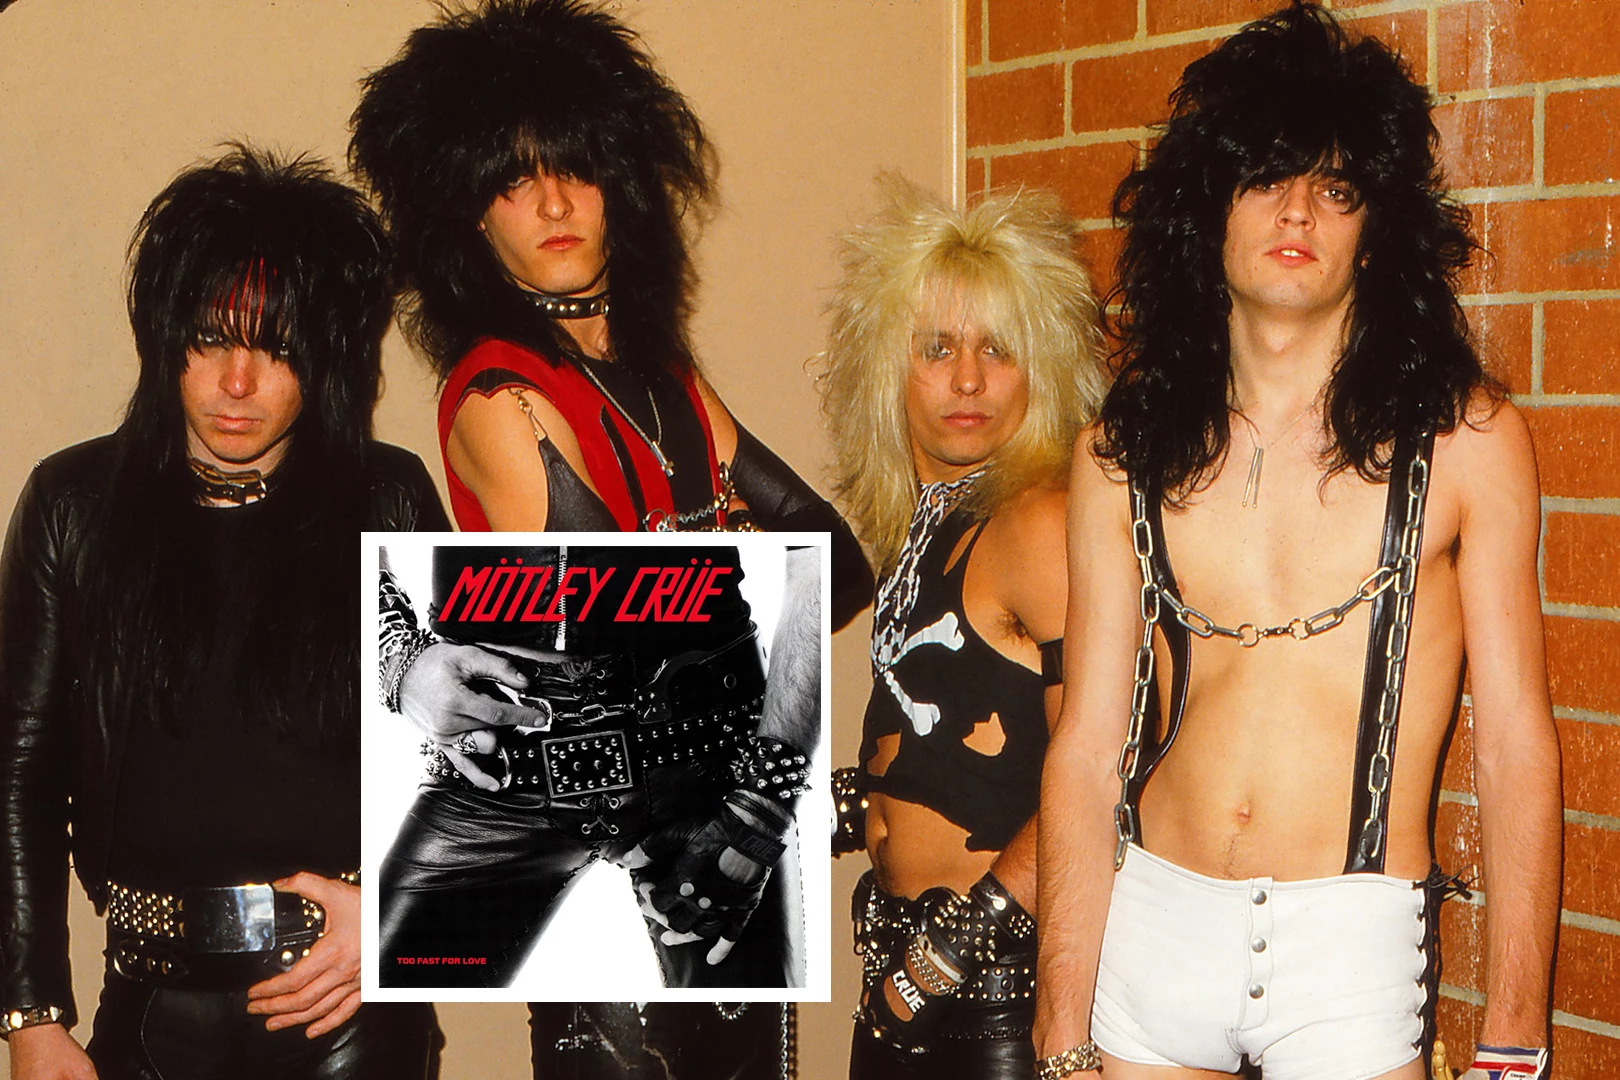 RIP Magazine - On this day in 1982, MOTLEY CRUE released